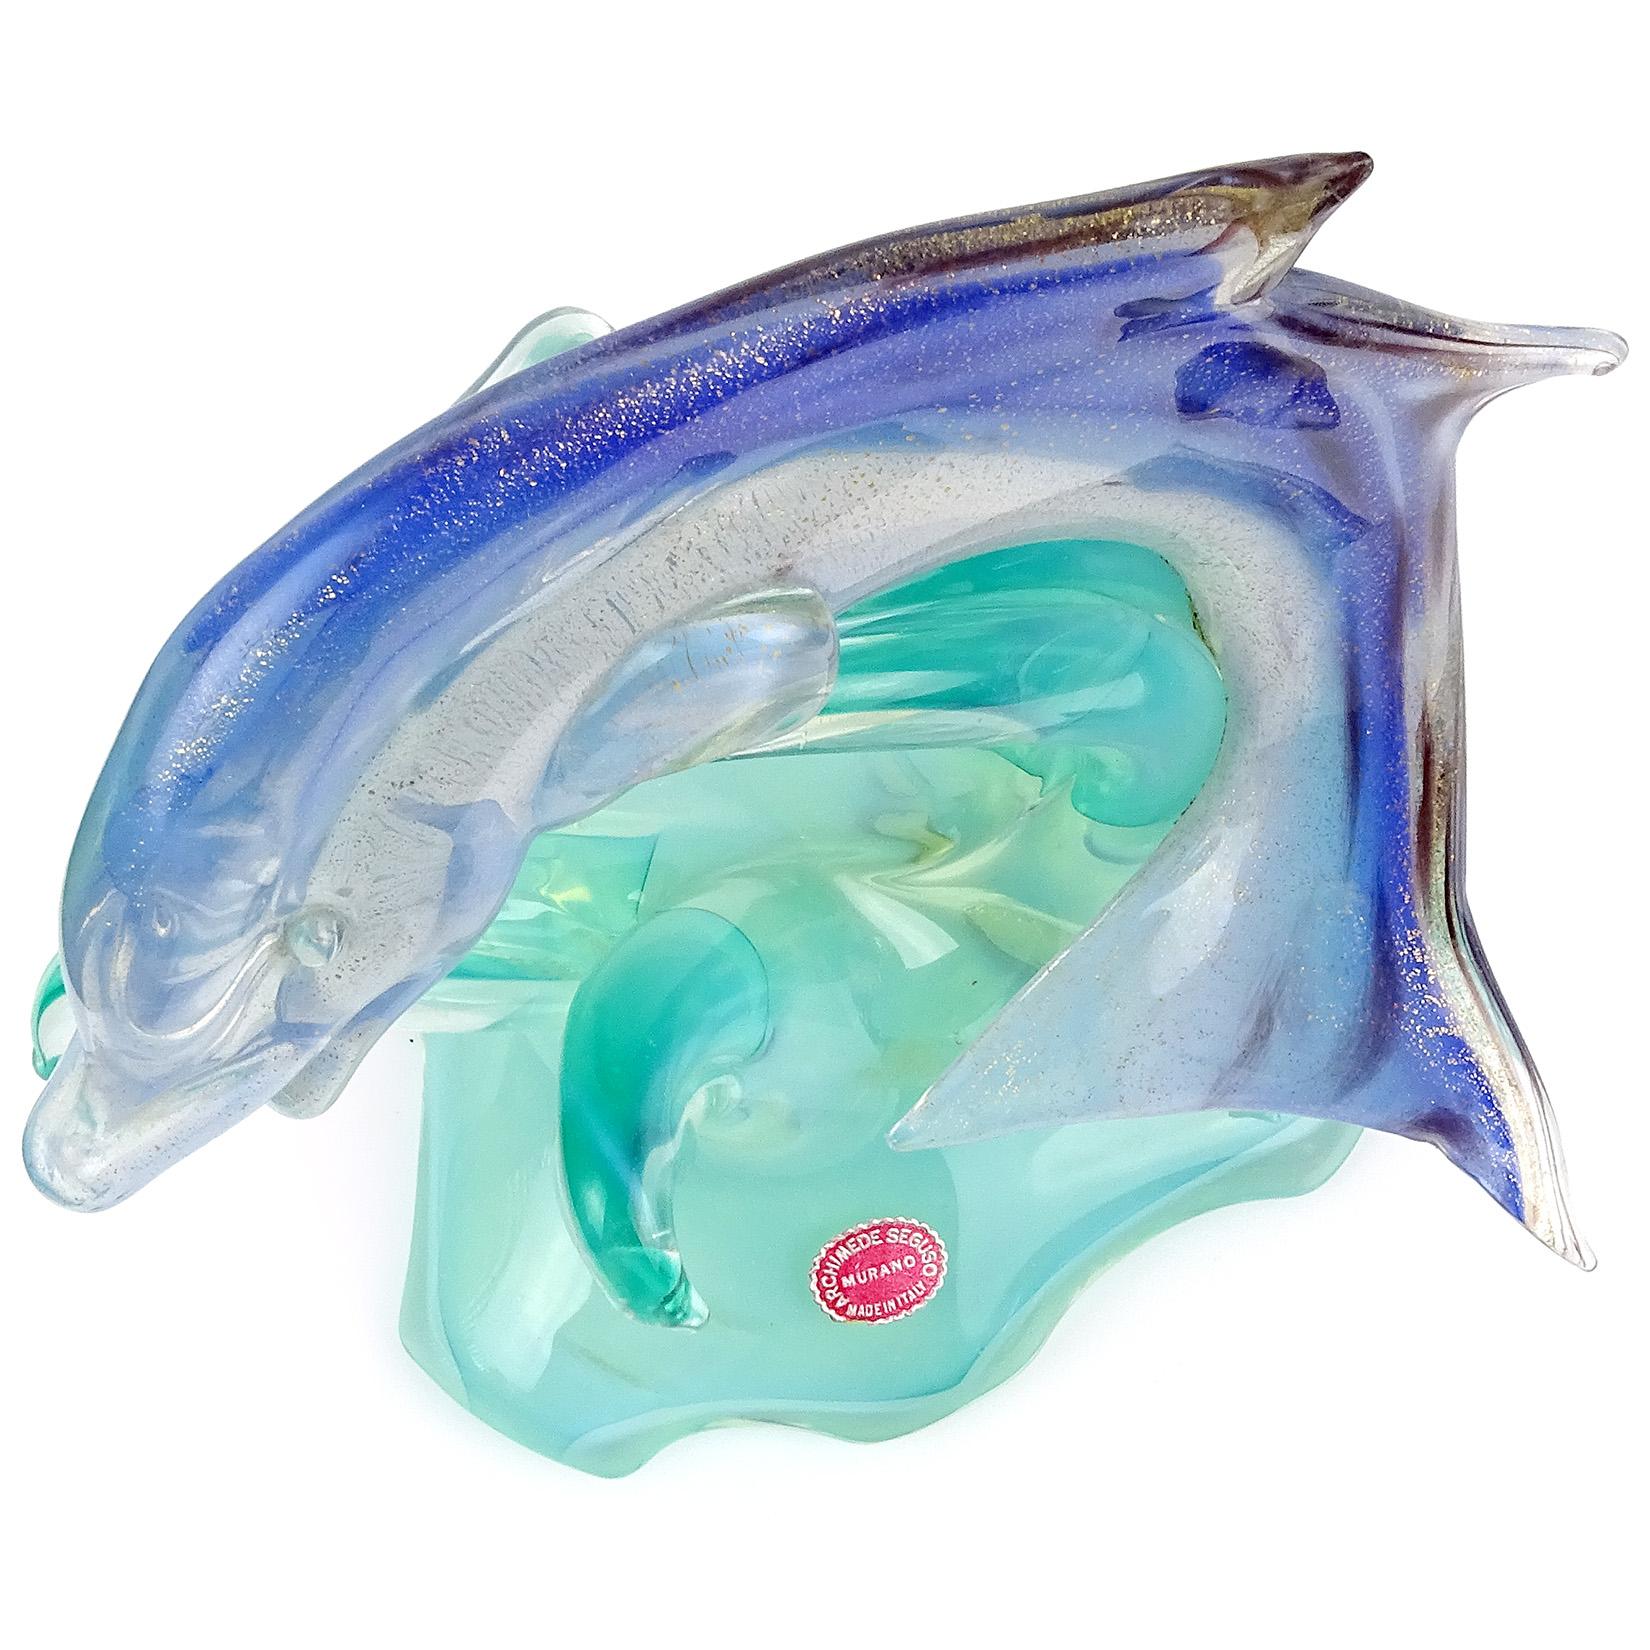 Beautiful vintage Murano hand blown opalescent green, blue, dark spots and gold flecks Italian art glass leaping dolphin or fish sculpture. Documented to designer Archimede Seguso, and published in his 